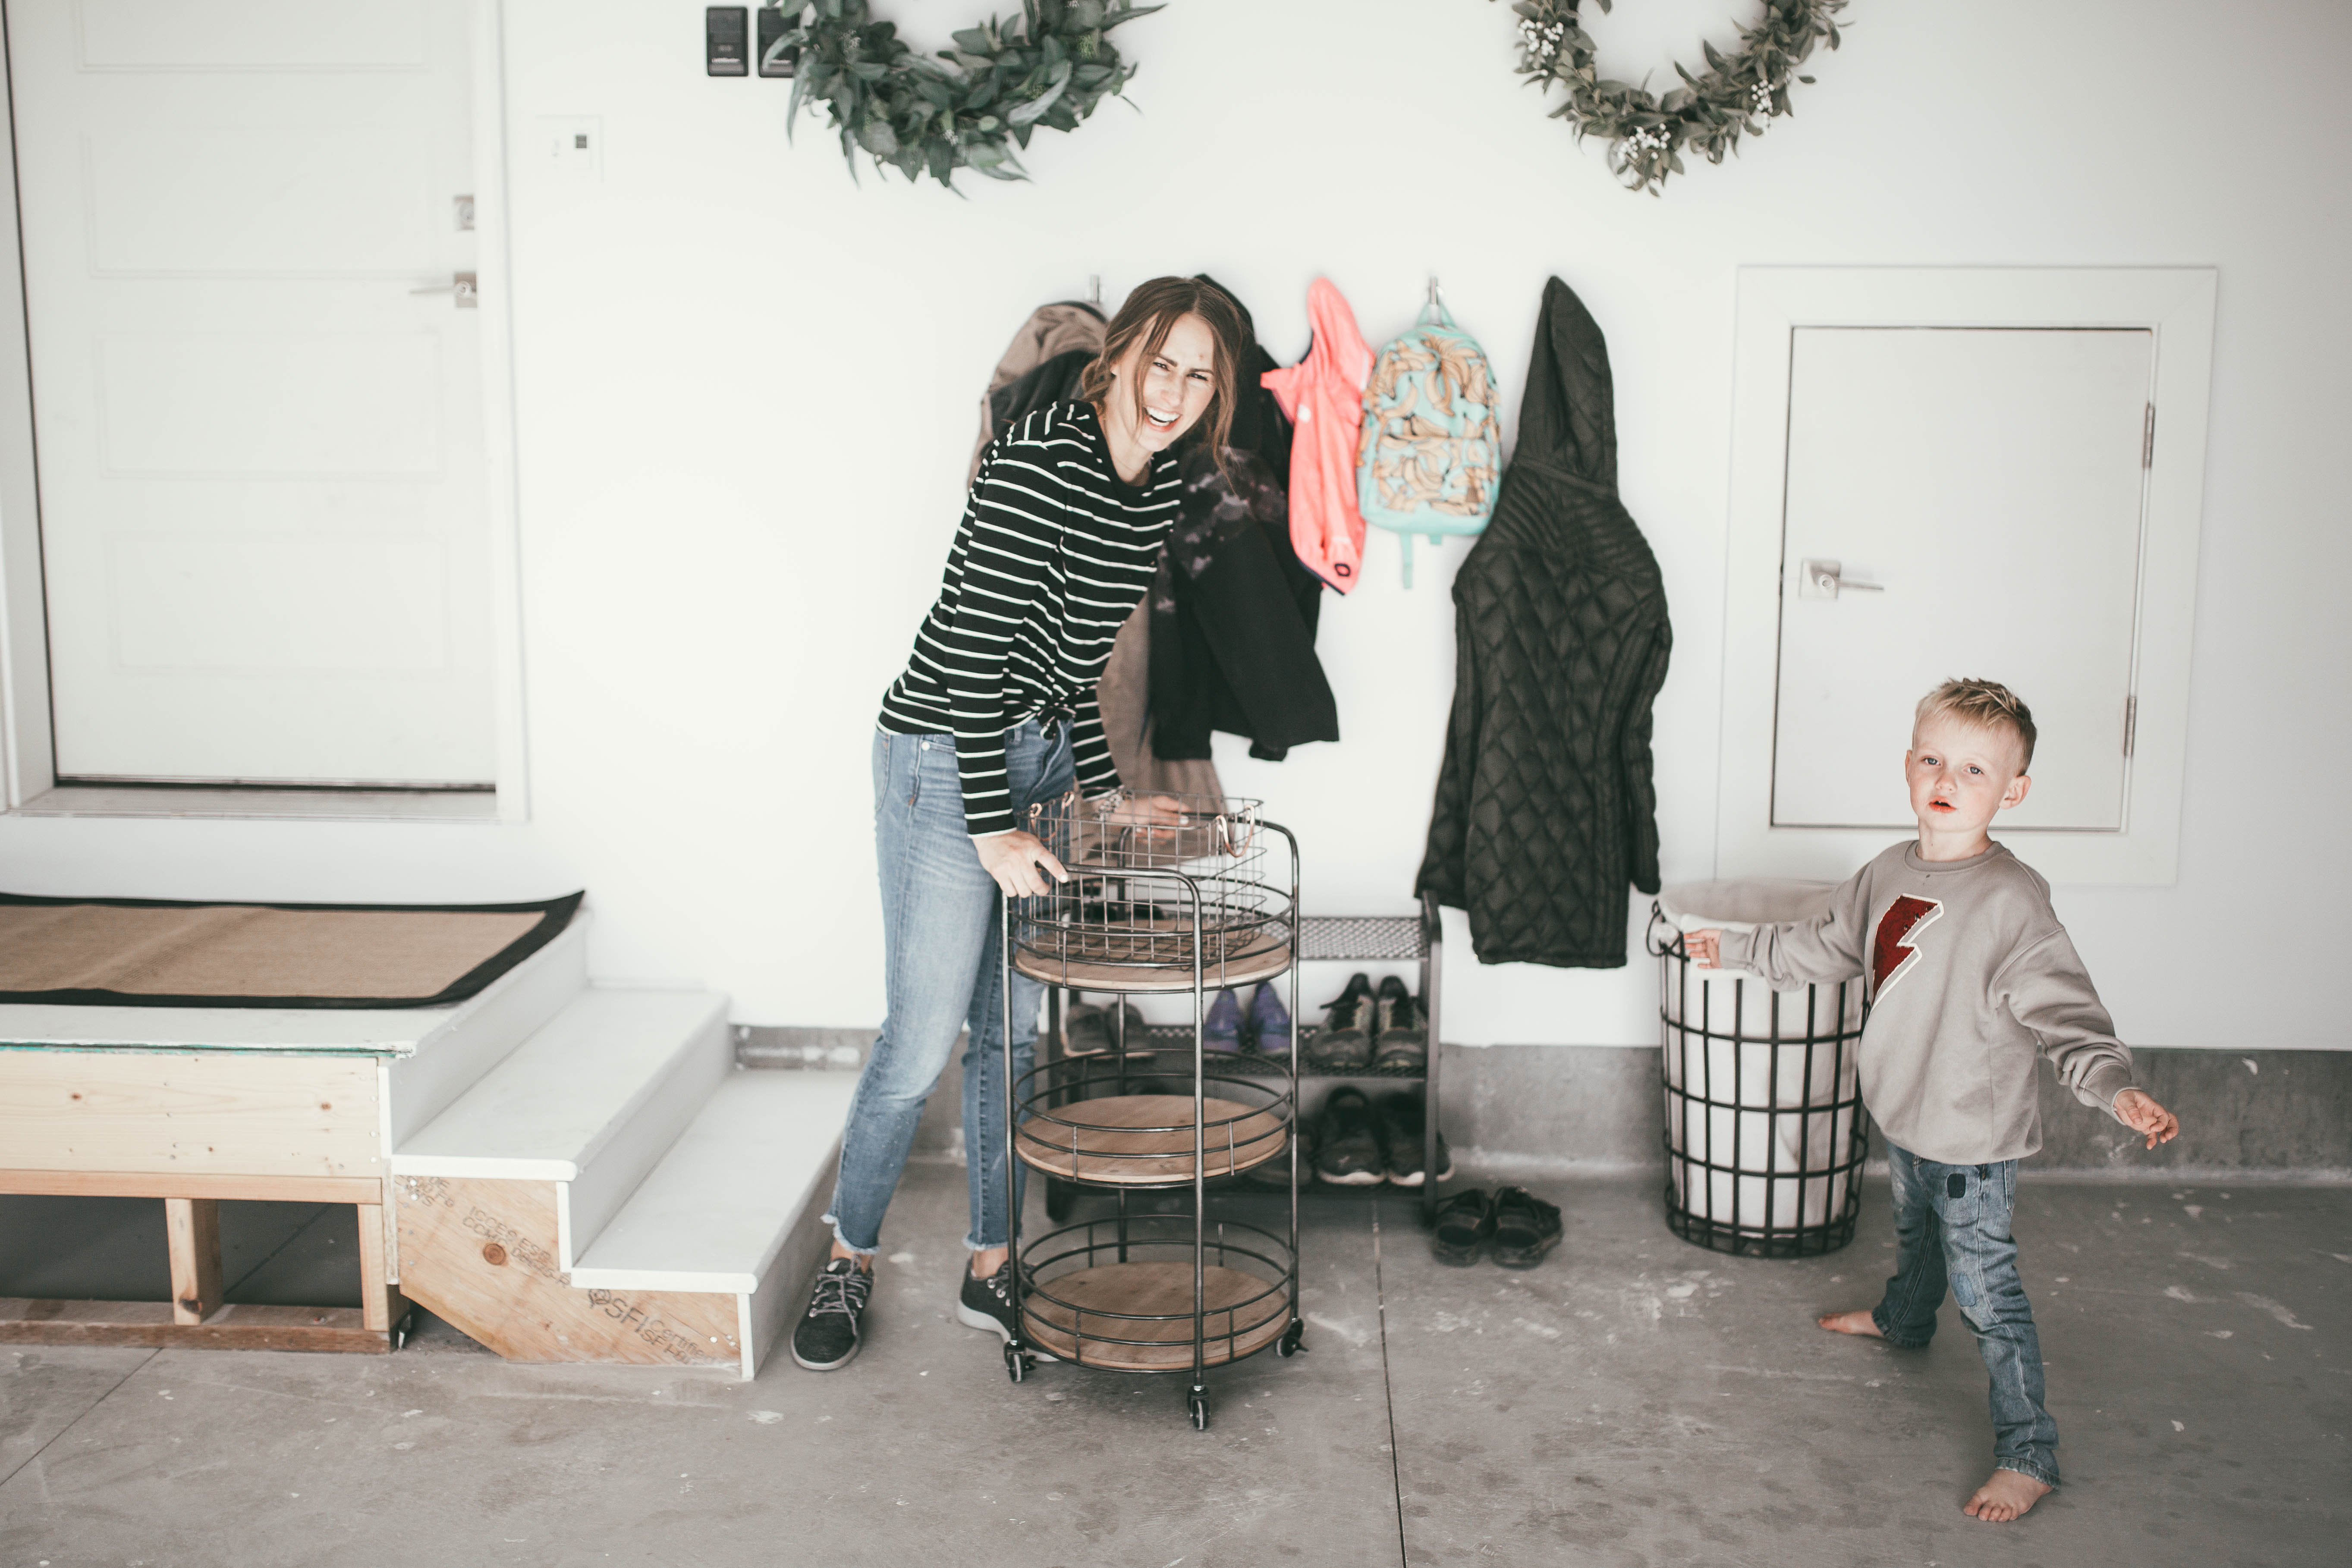 WHo else has a forgotten space? Utah Style Blogger Dani Marie is sharing a quick update to their forgotten space- the garage. See it here!